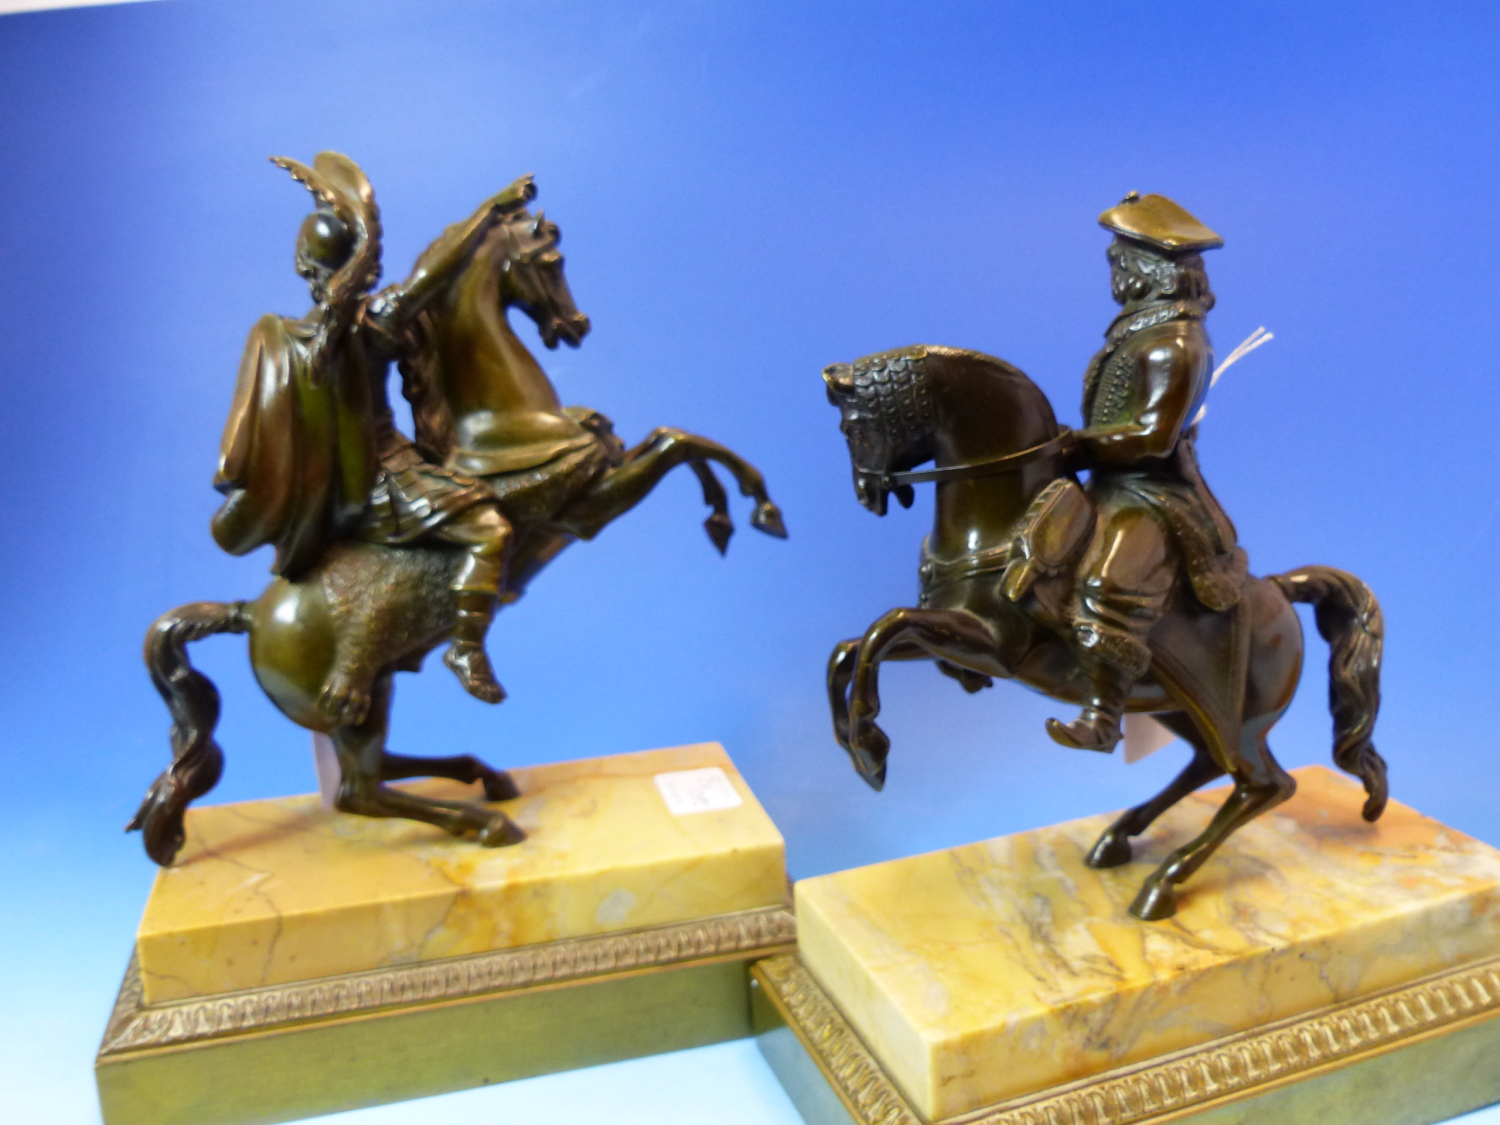 A PAIR OF 19th.CENTURY EQUESTRIAN BRONZES OF A COSSACK AND A ROMAN SOLDIER, THEIR HORSES REARING ON - Image 15 of 20